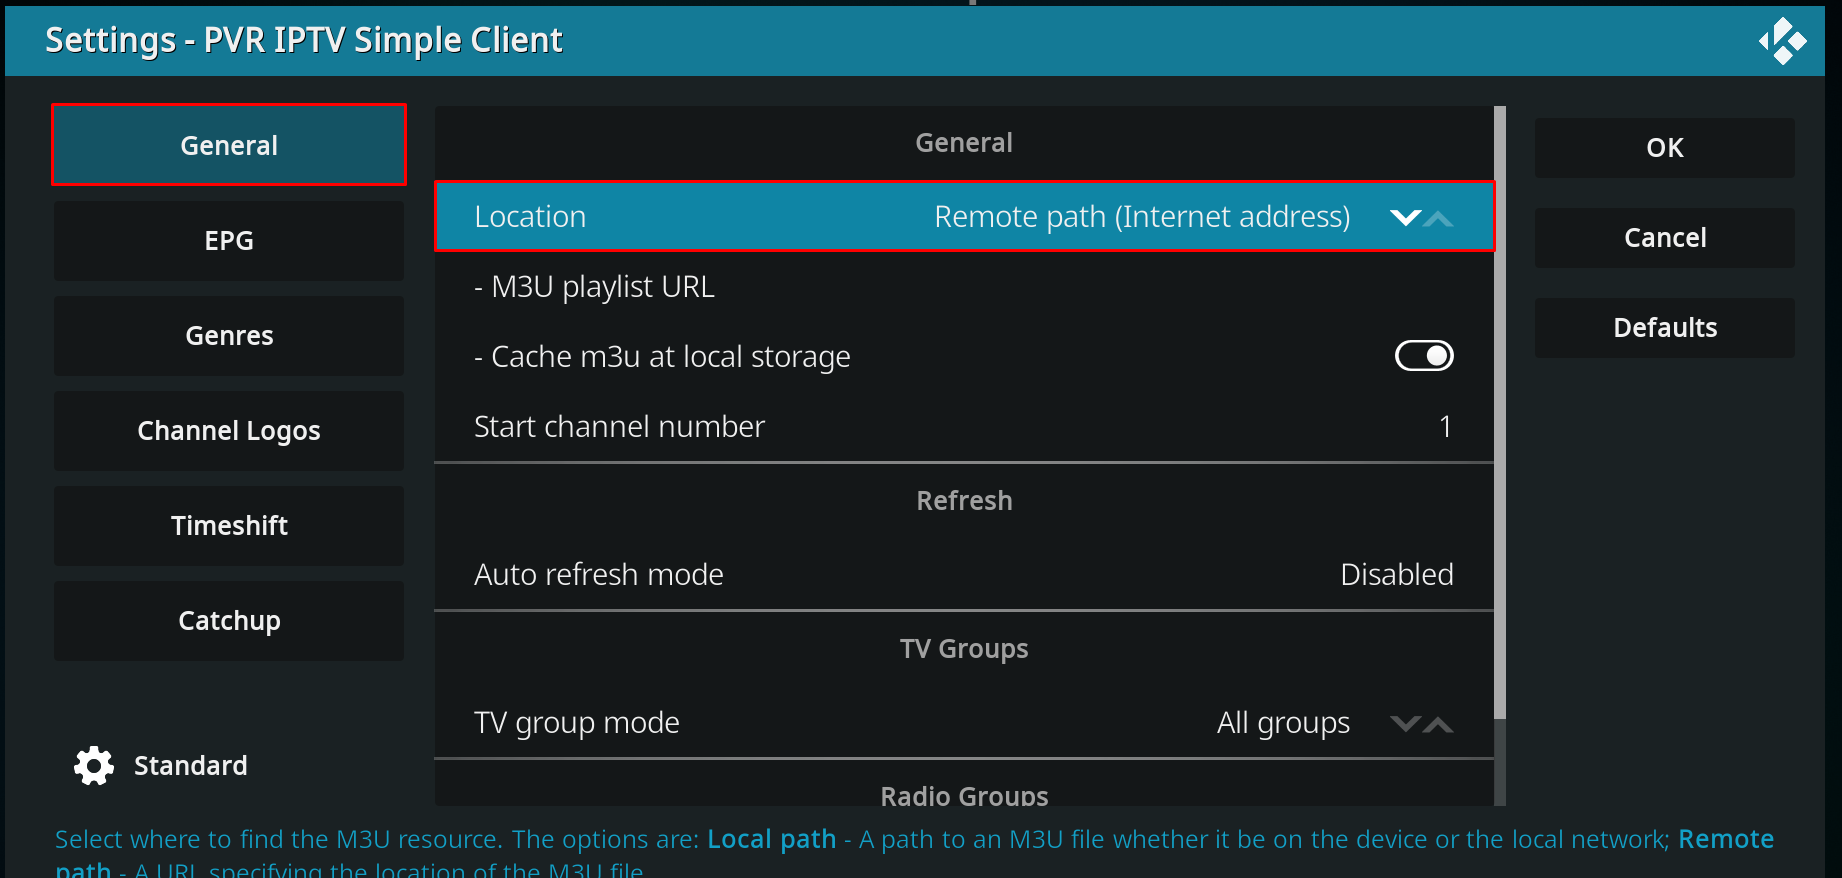 Select General to load the content of 247 IPTV